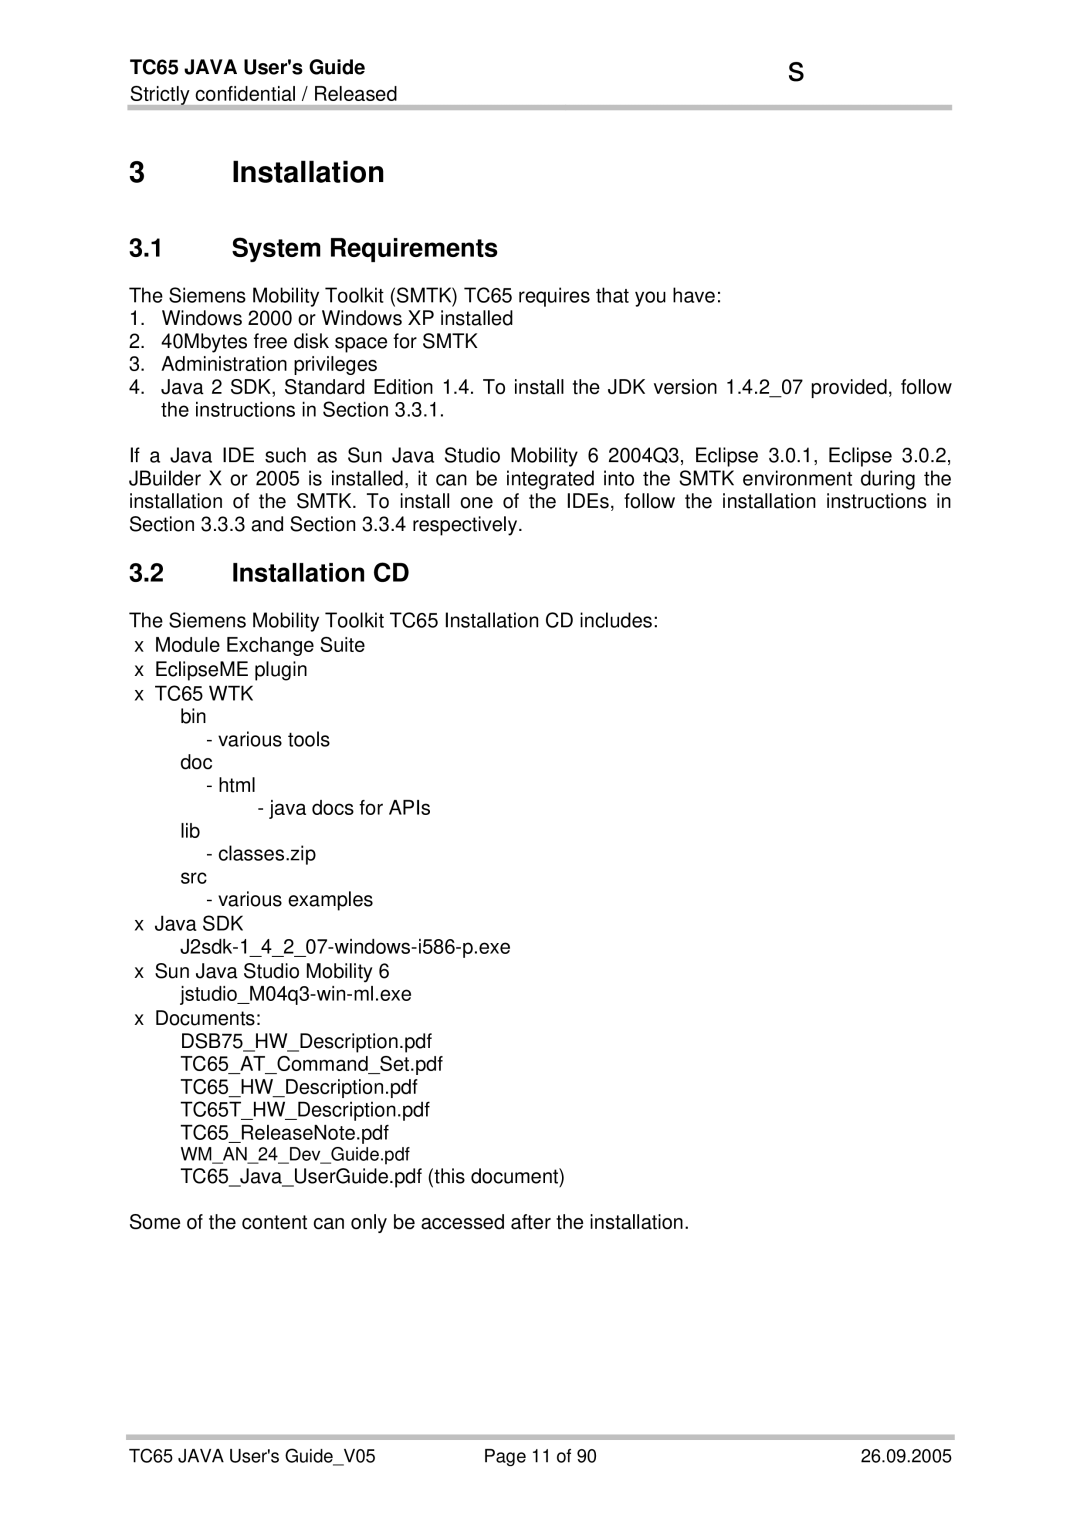 Siemens TC65 manual System Requirements, Installation CD 